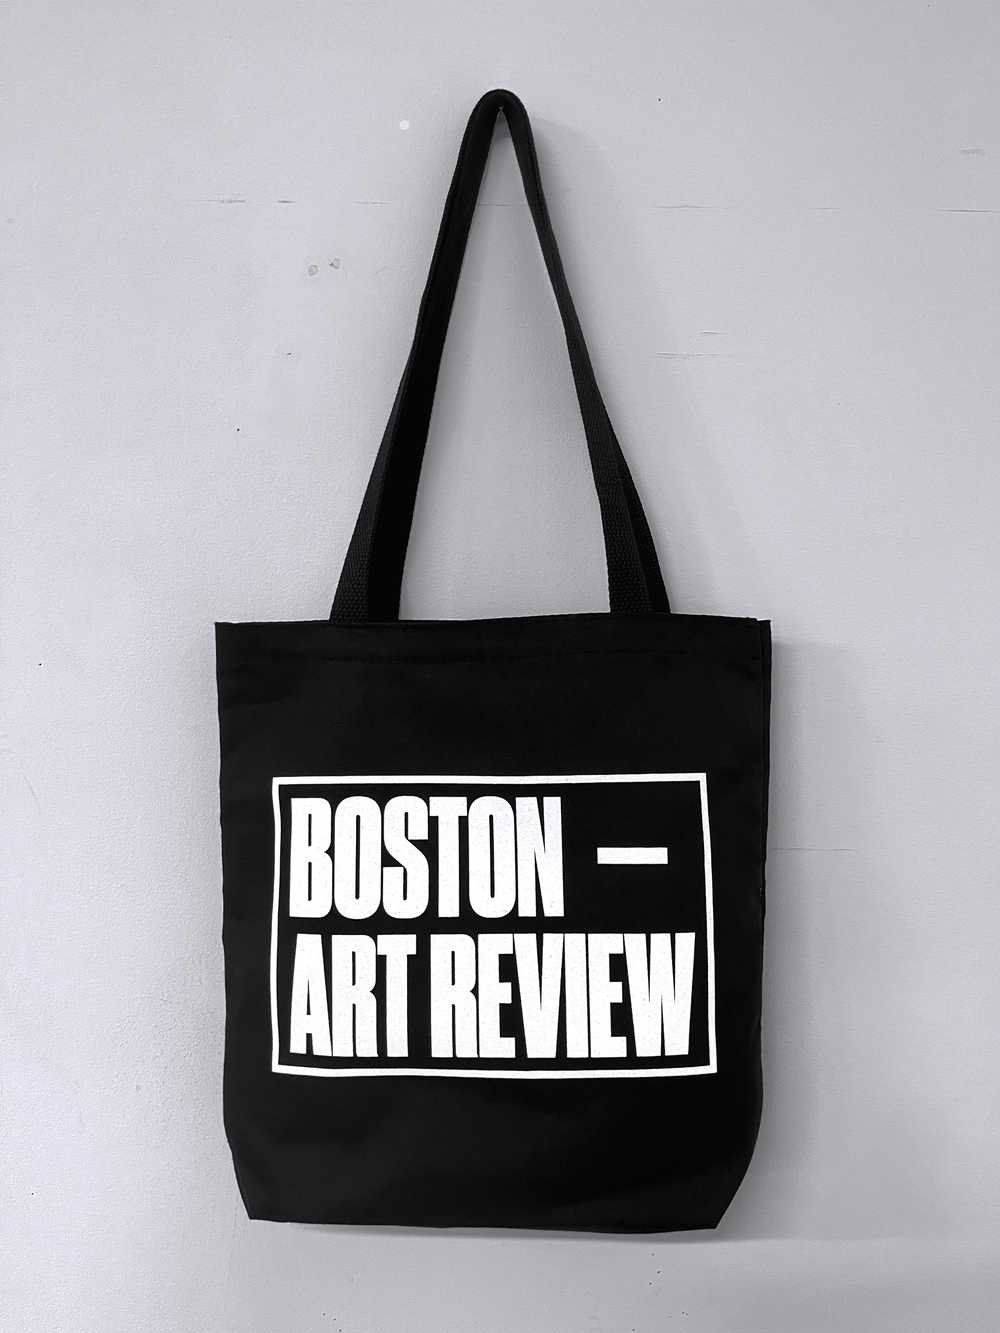 The BAR Tote